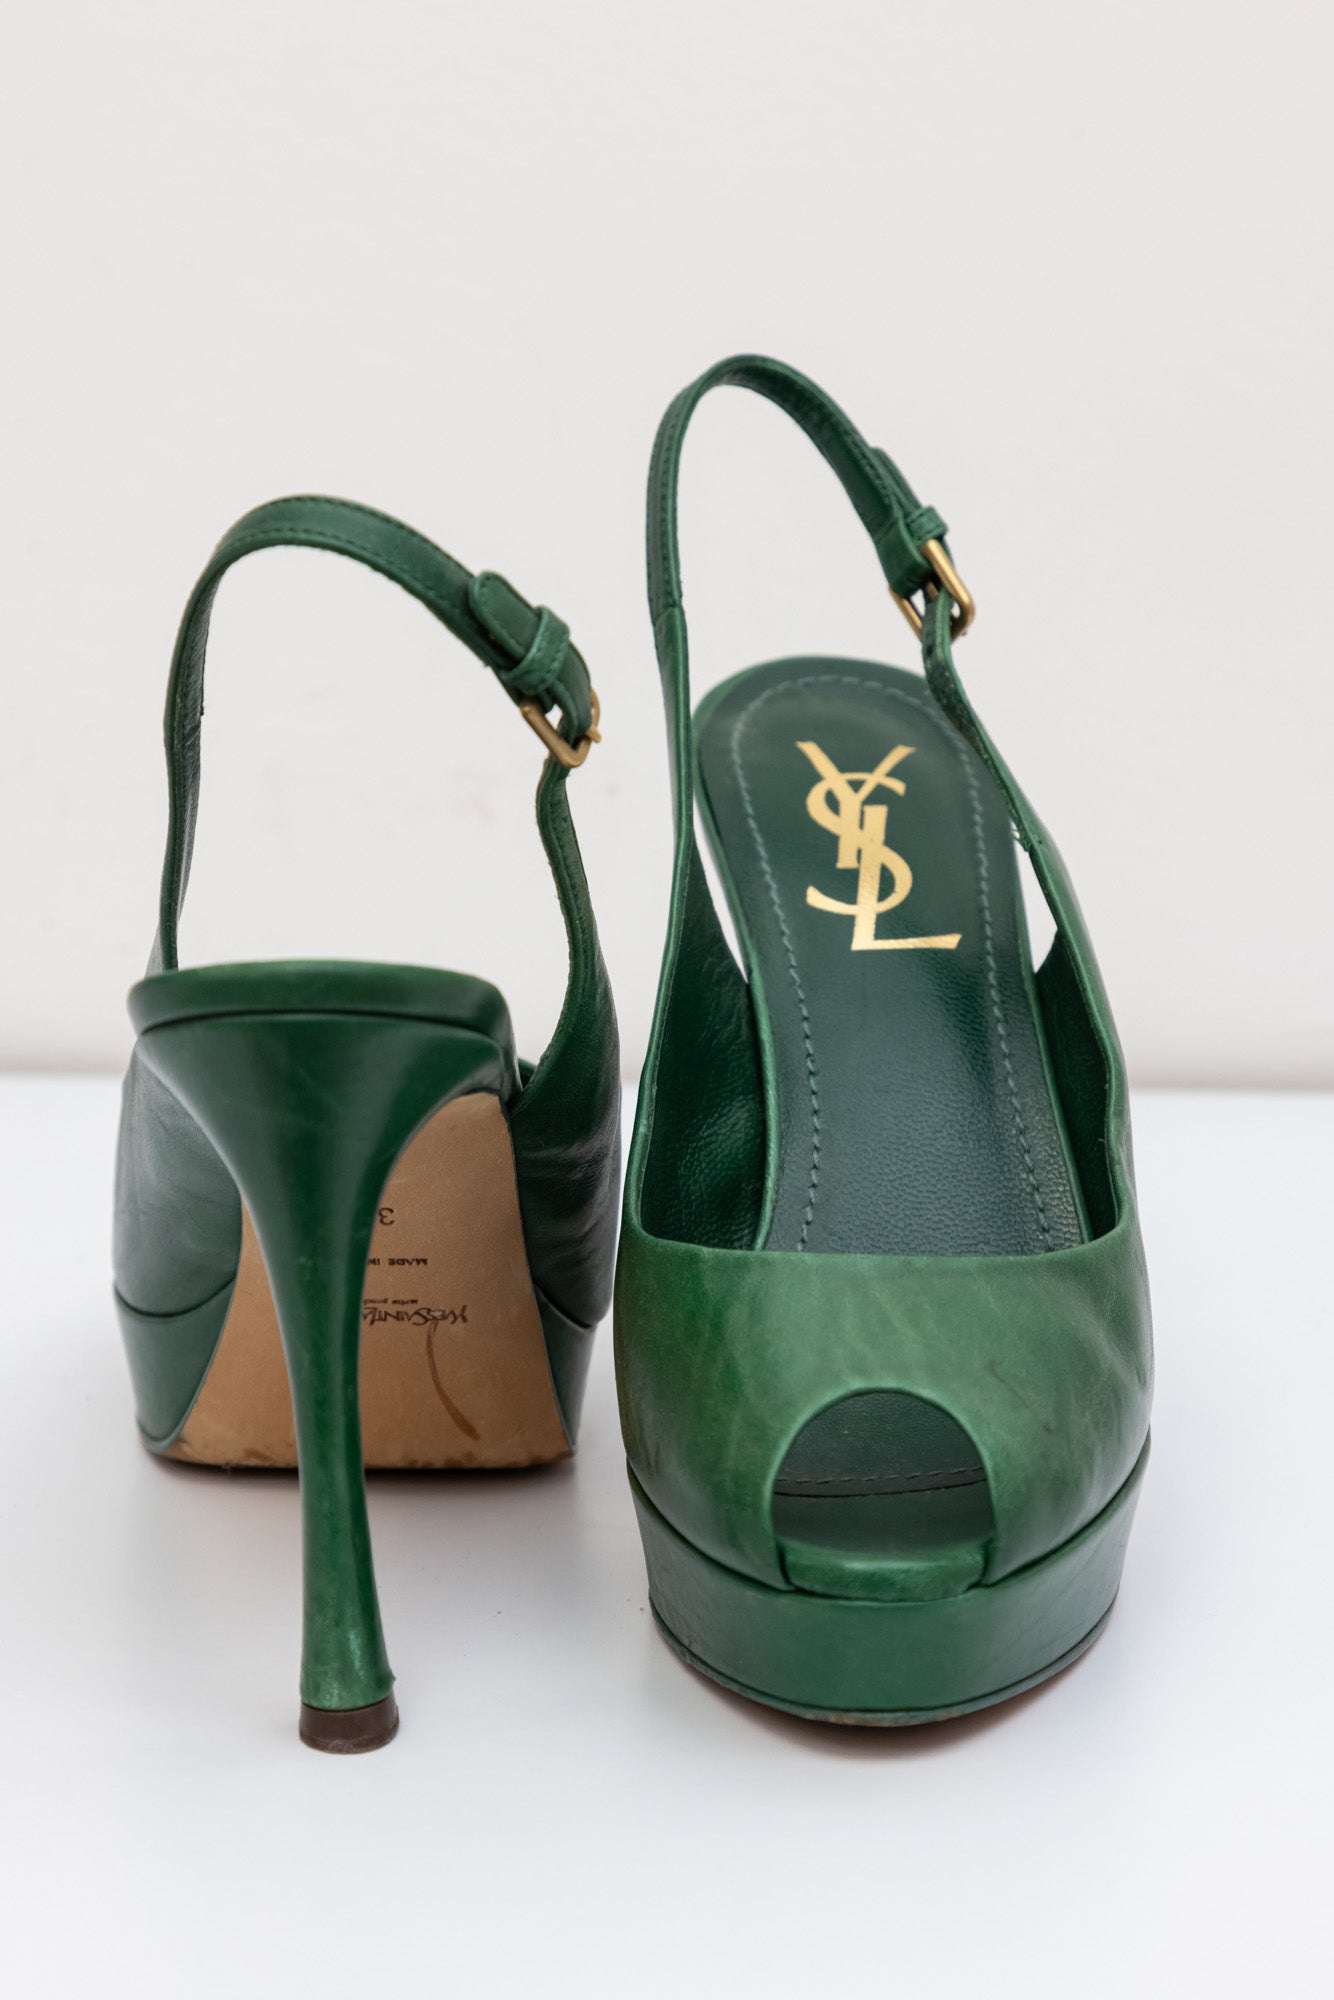 YVES SAINT LAURENT Green Leather Sling-back Pumps Heels | Size IT 37 | Made in Italy